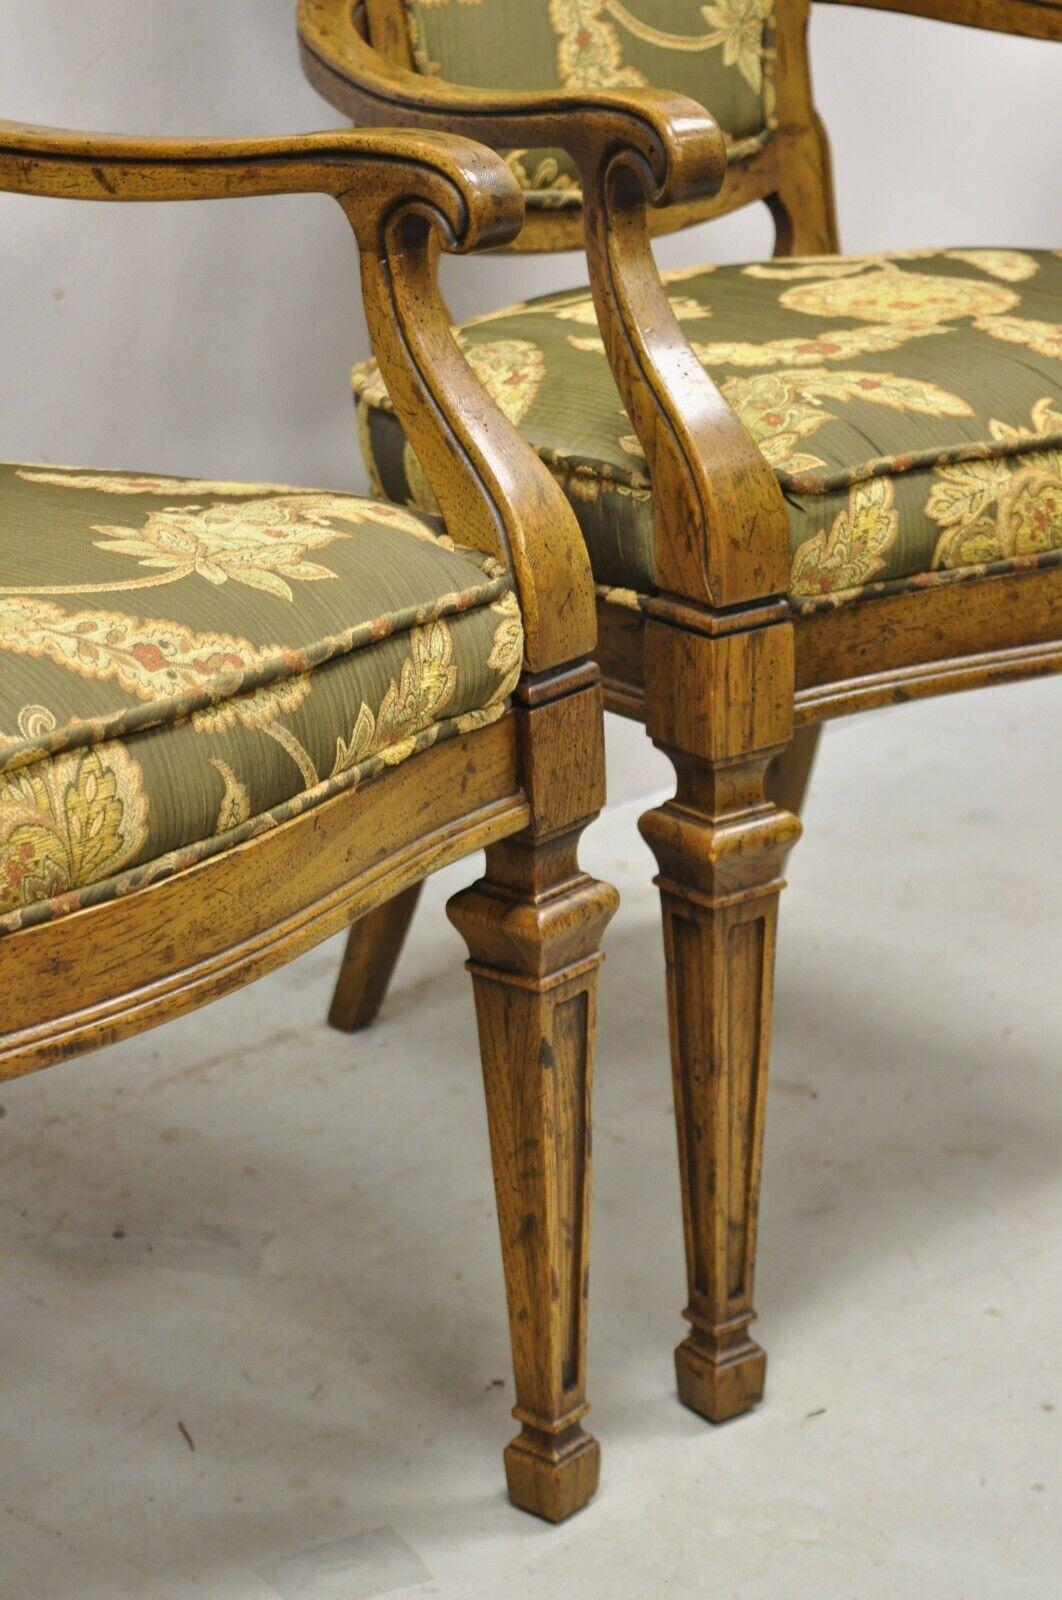 Vintage Hollywood Regency Keyhole Back Fireside Lounge Arm Chairs - a Pair For Sale 2